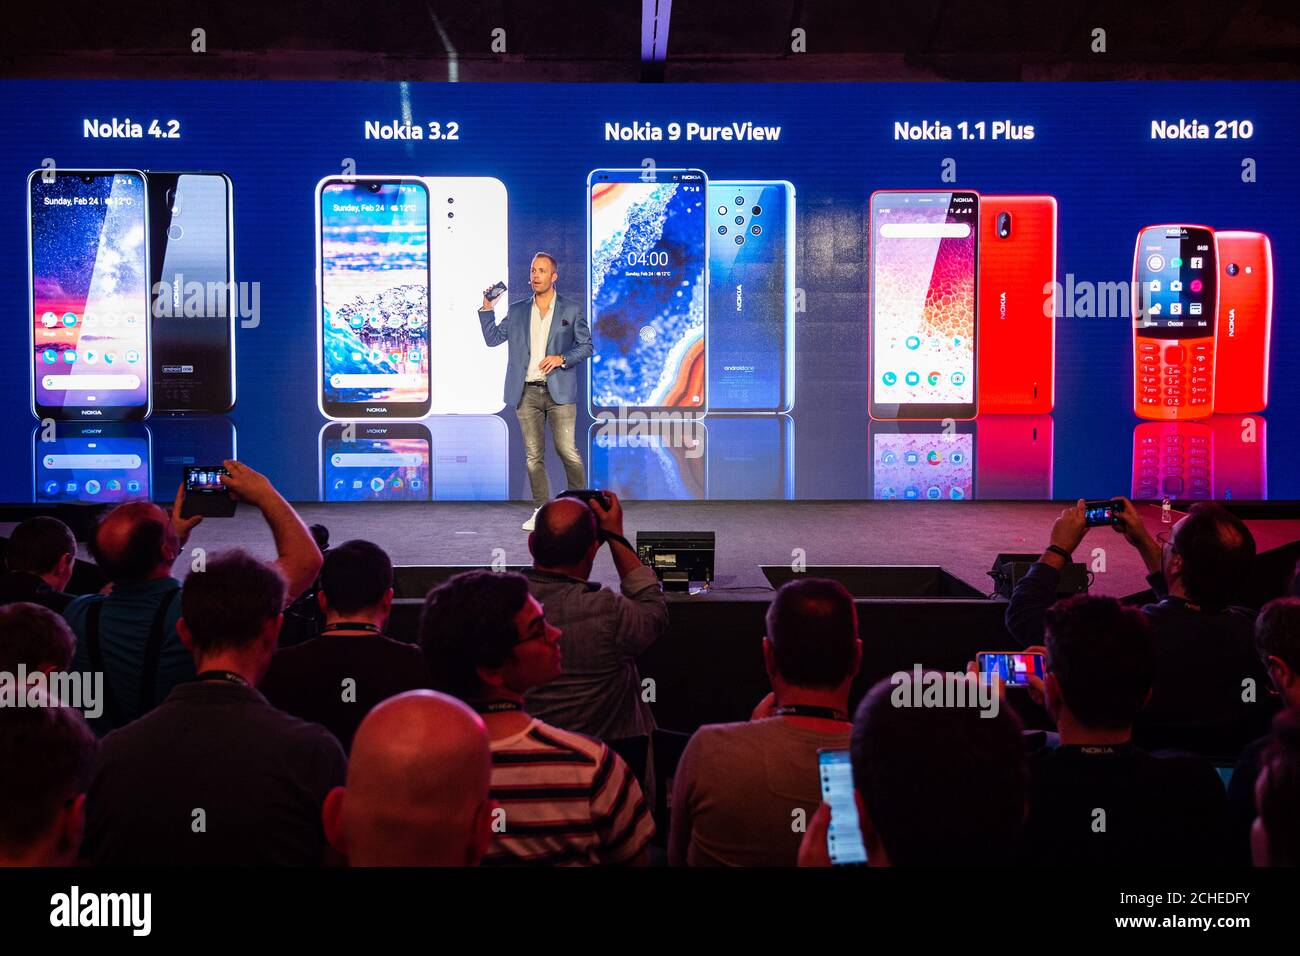 EDITORIAL USE ONLY Juho Sarvikas, Chief Product Officer, HMD Global, announces on stage 5 new Nokia handsets, which include the Nokia 9 Pureview, Nokia 4.2, Nokia 3.2, Nokia 1 Plus and the Nokia 210, at the Mobile World Congress in Barcelona. Stock Photo